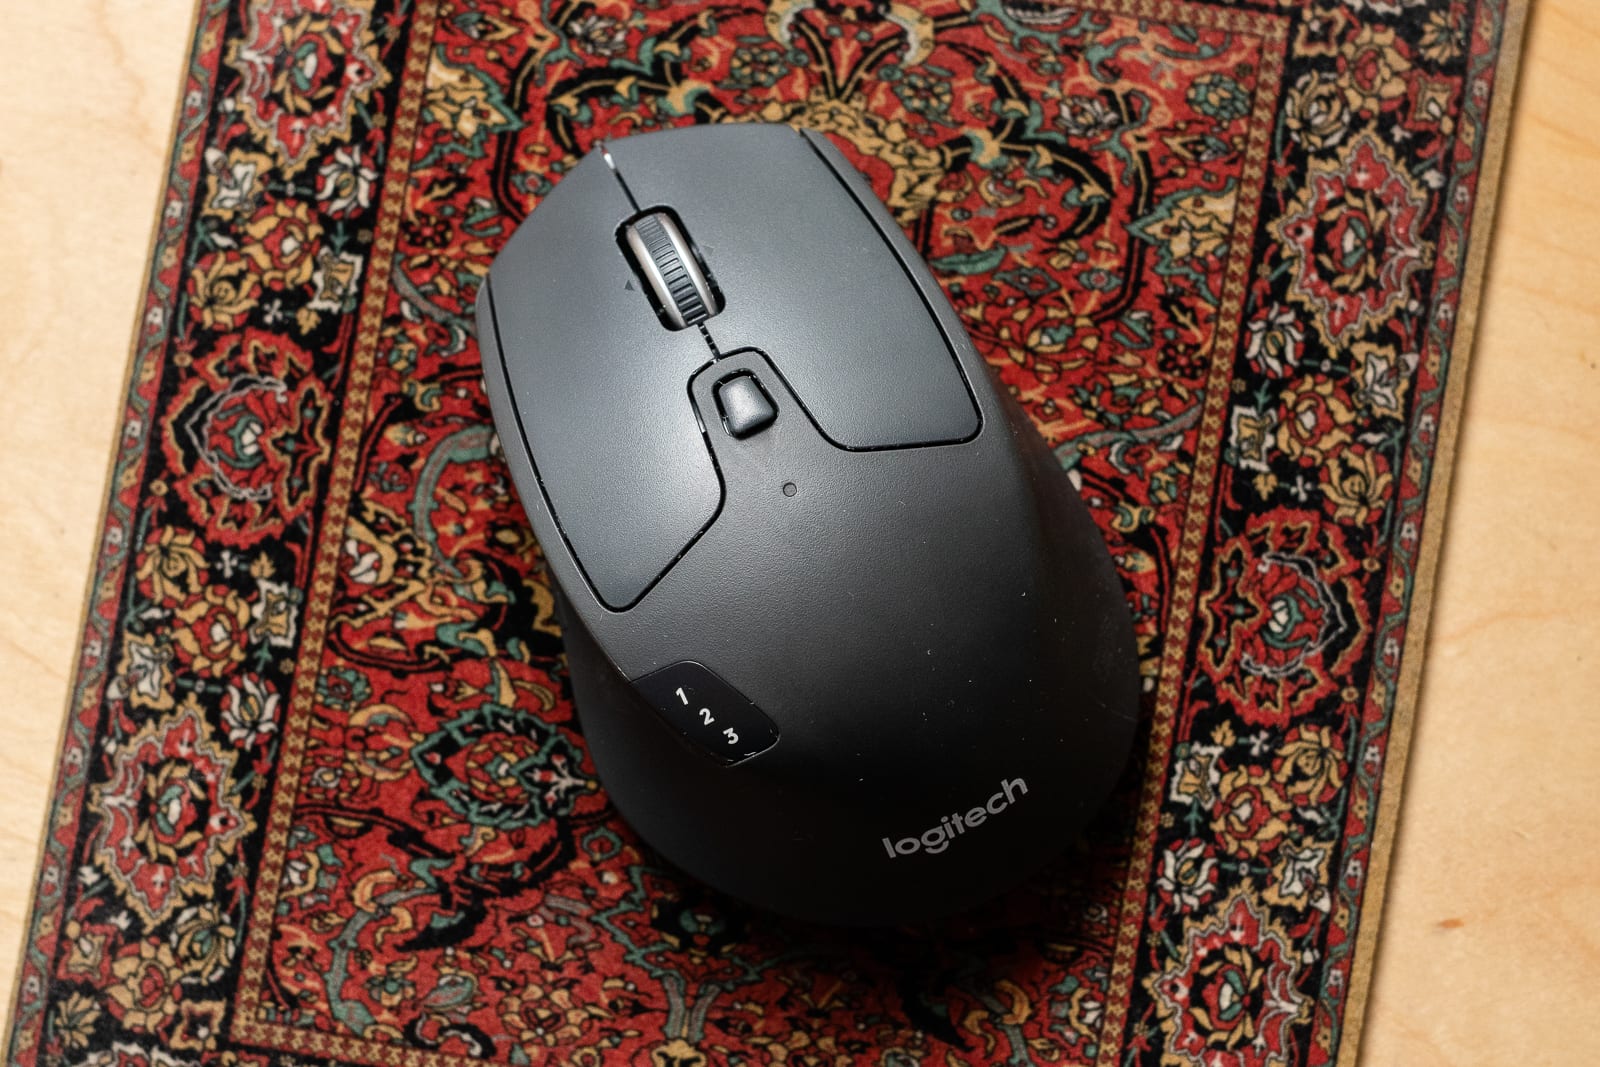 The best mouse | Engadget